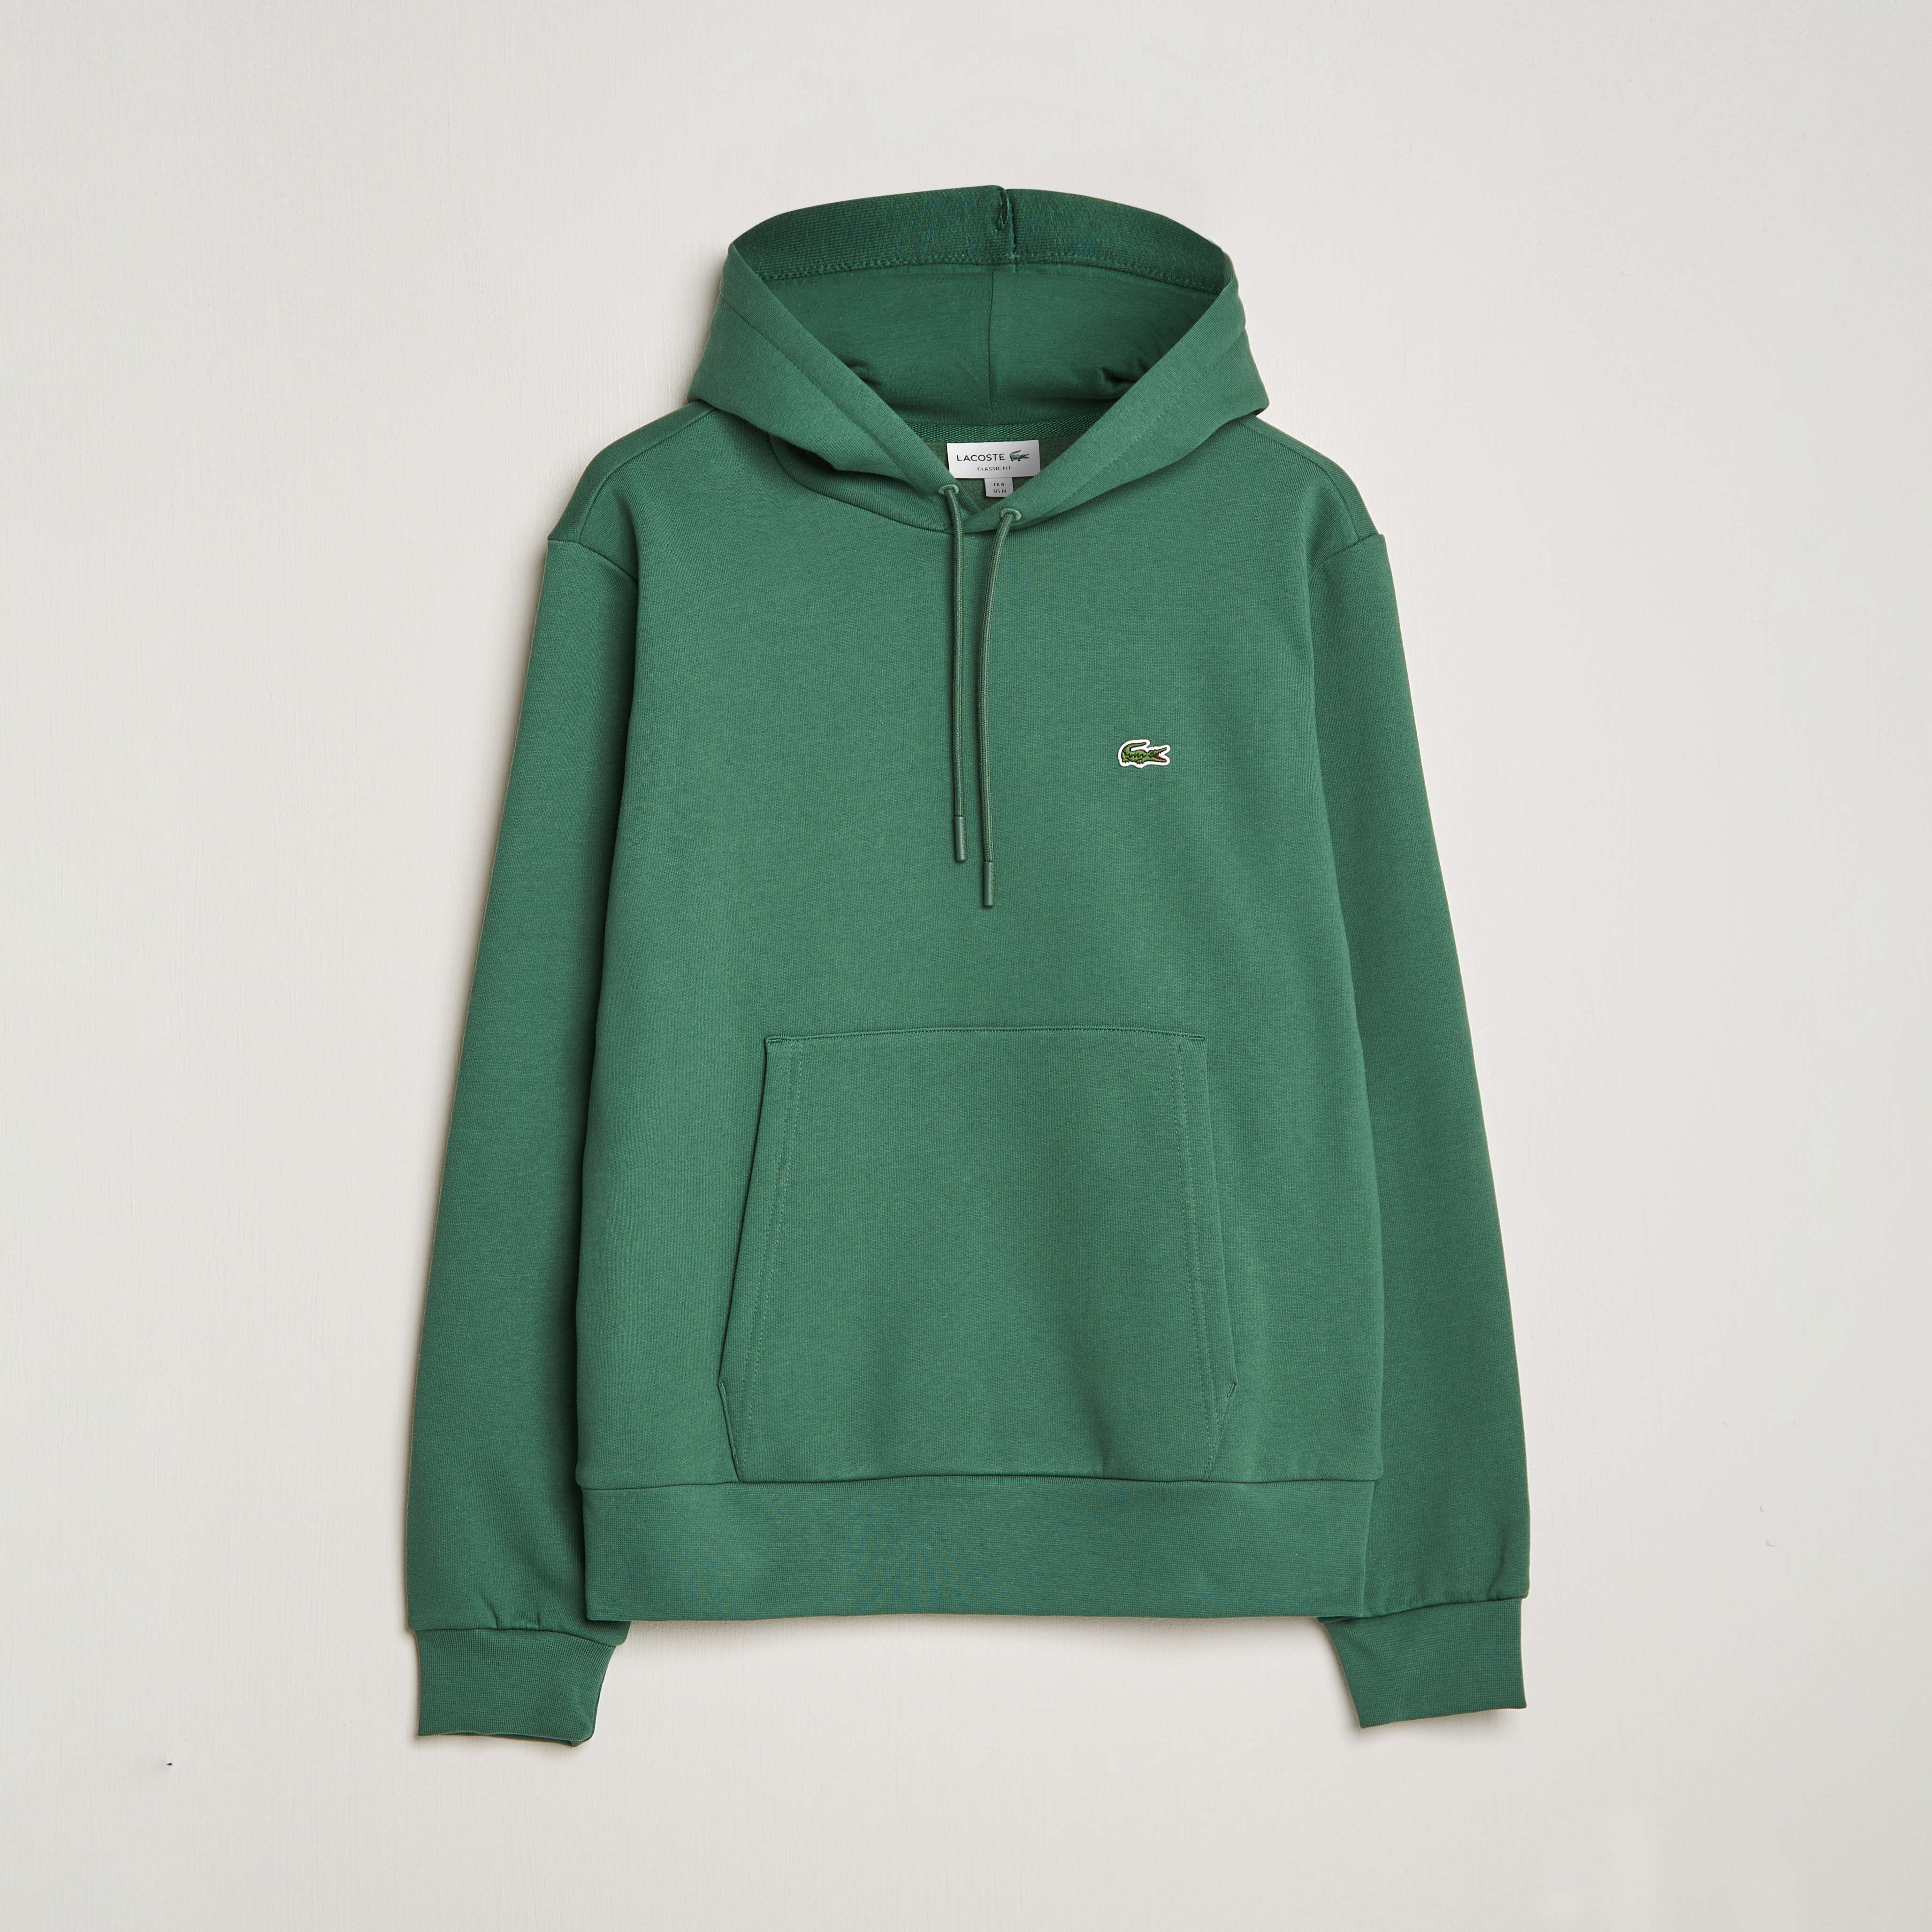 Lacoste Hoodie Sequoia at